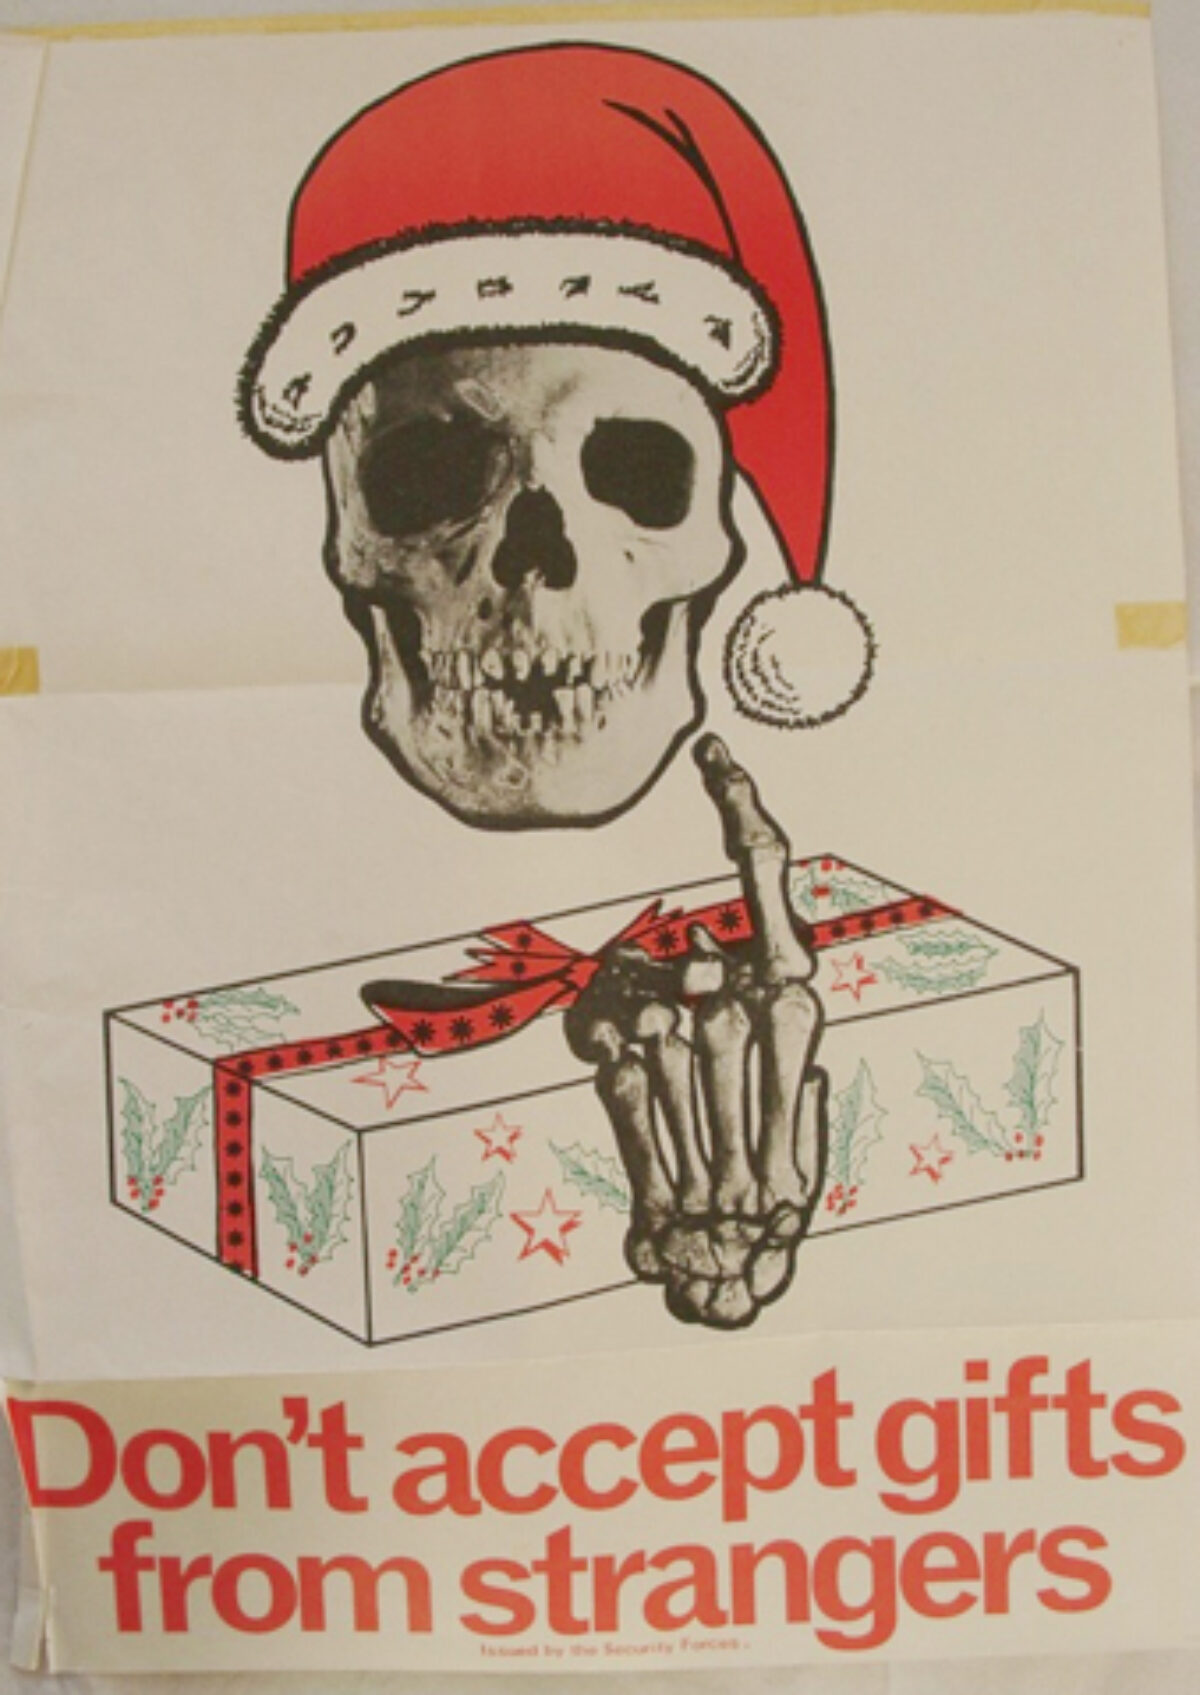 Northern Ireland - Don't accept gifts from strangers poster.